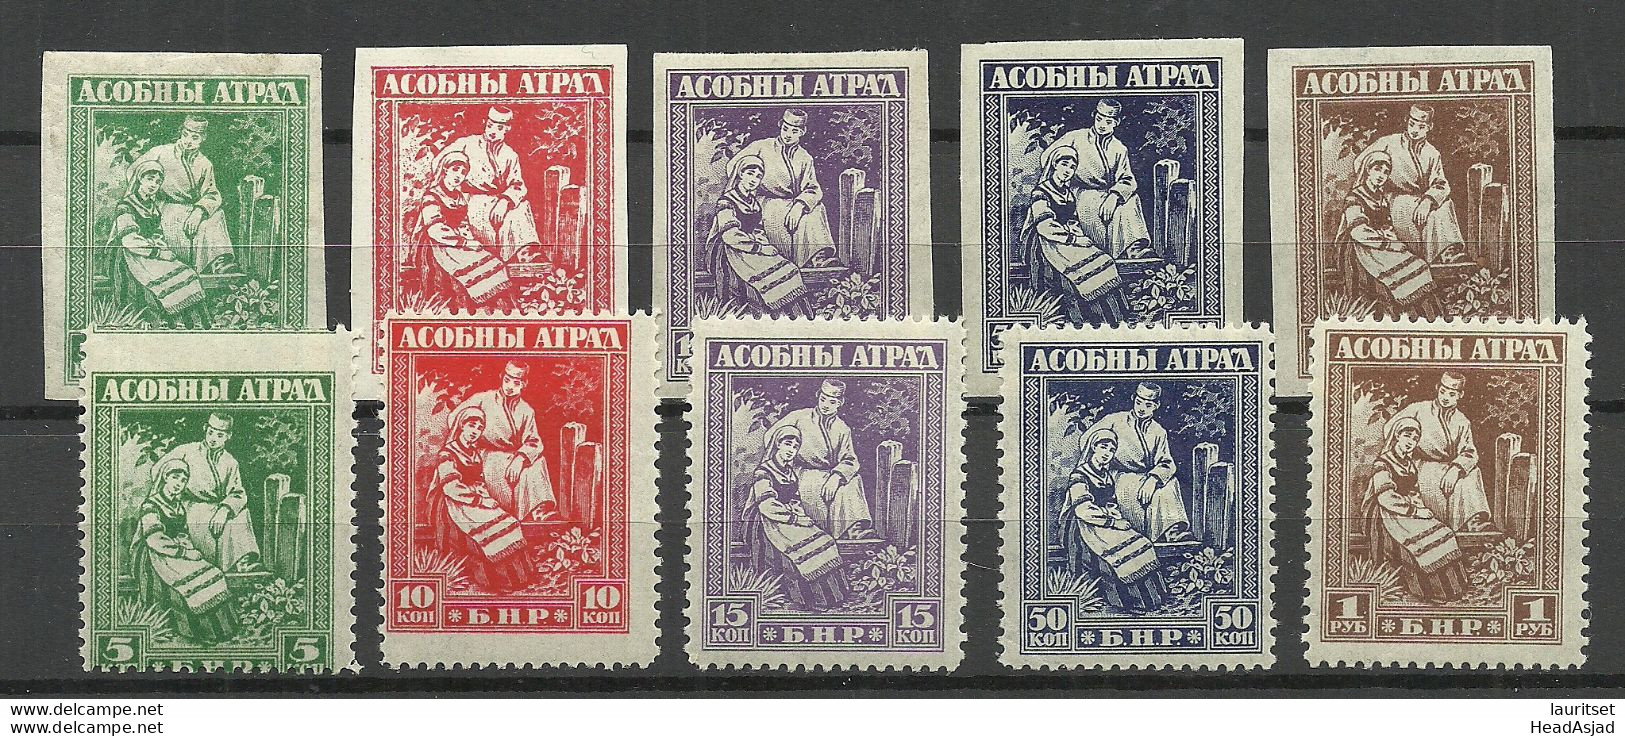 BELARUS 1919 General Bulak-Bulakhov Complete Sets Imperforated + Perforated MNH/MH NB! 1 Stamp Has Thinned Place! - Wit-Rusland